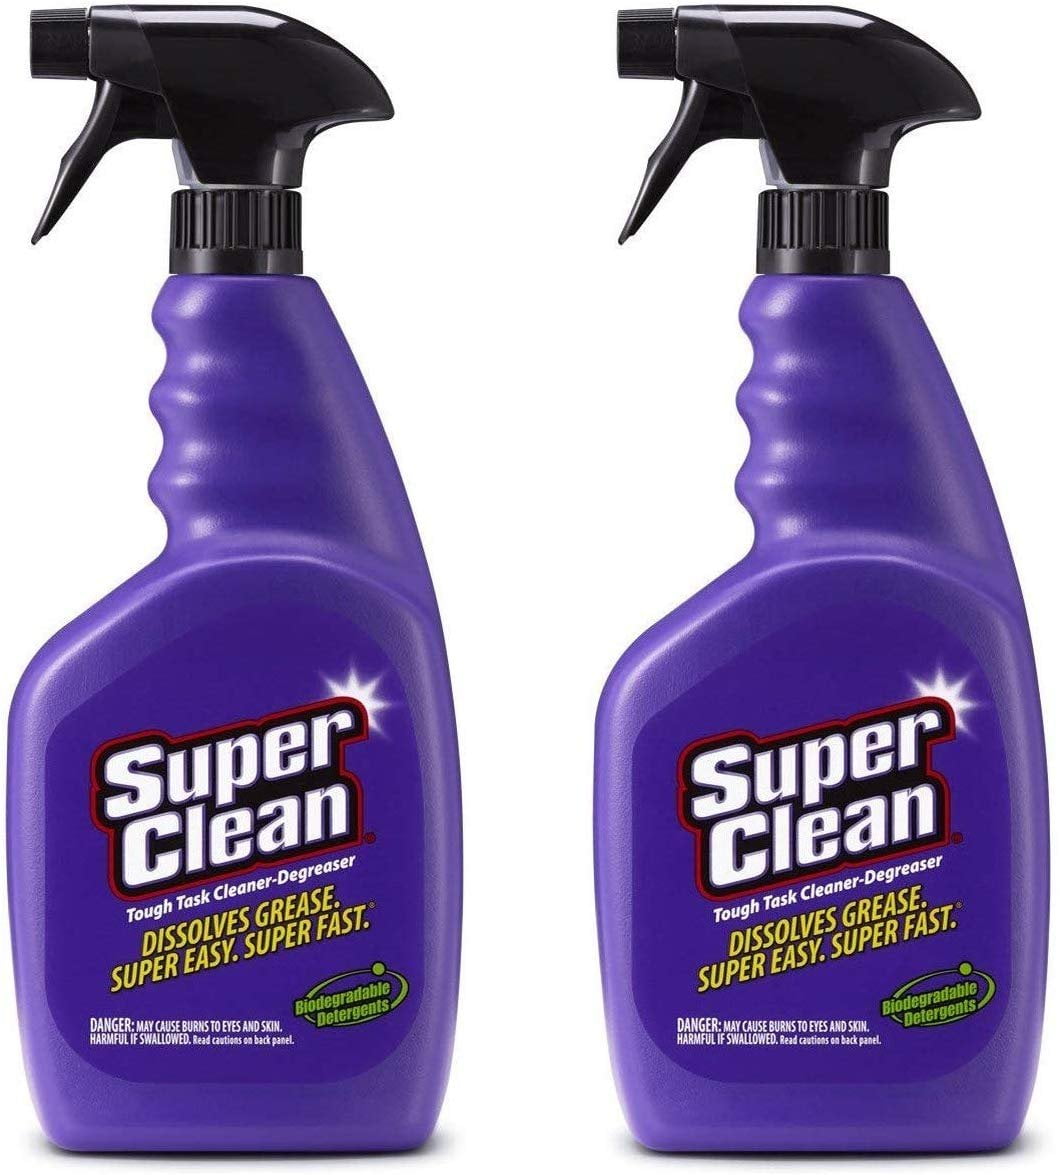  SuperClean Multi Surface All Purpose Gunk Remover Aerosol  Degreaser, Biodegradable, 17oz by Super Clean : Health & Household